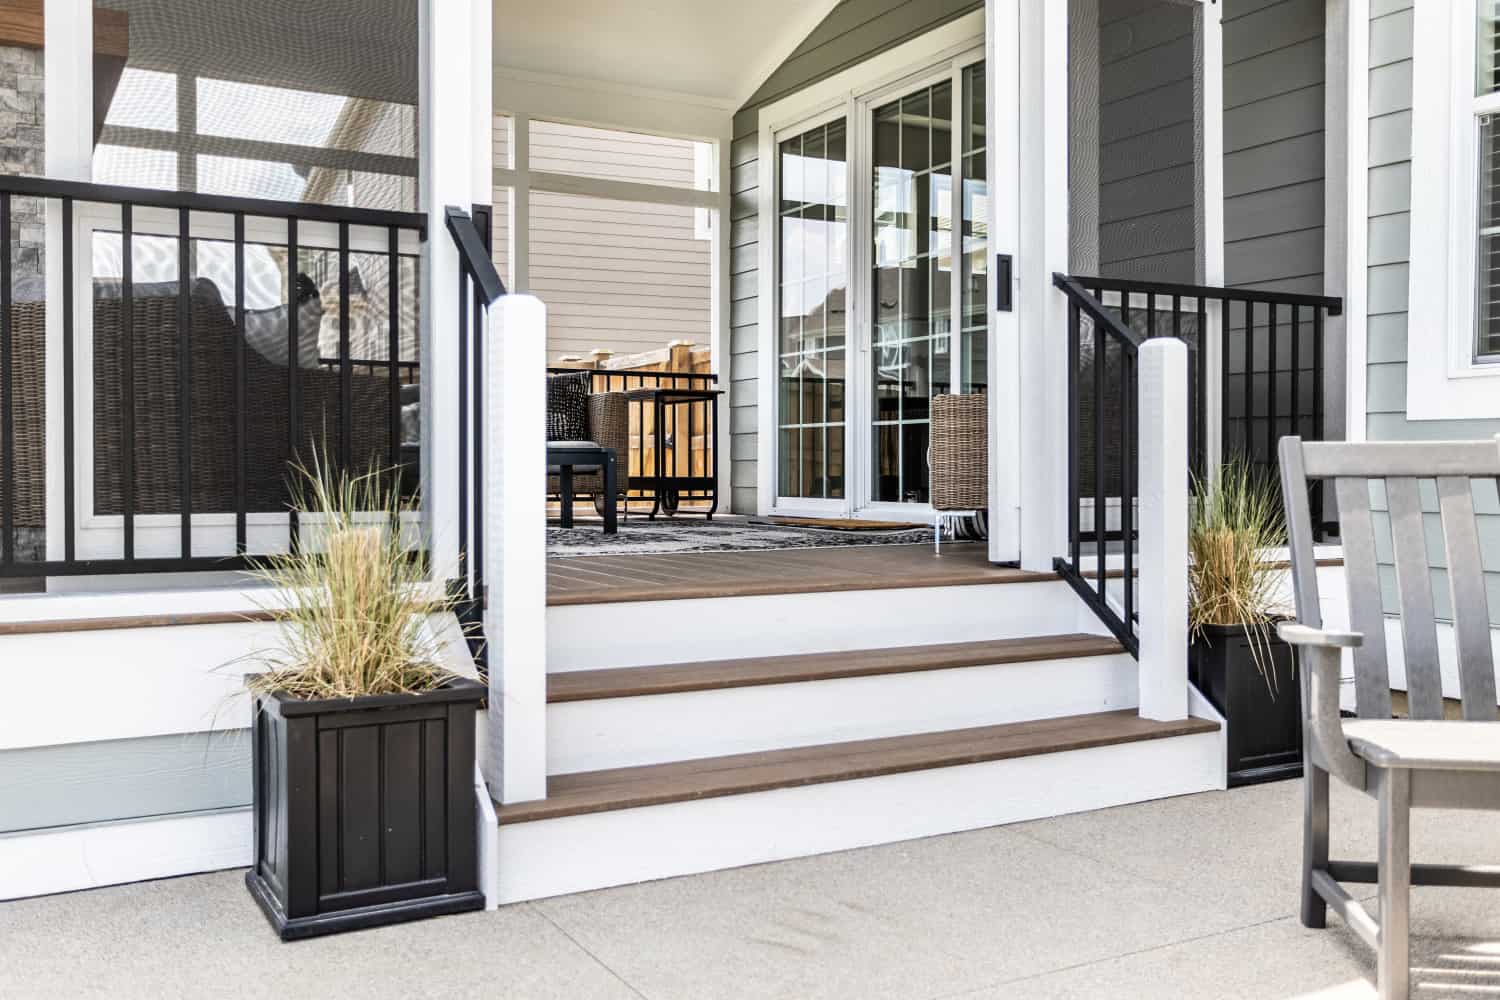 Nicholas Design Build | Remodel a porch with black furniture and a white railing.